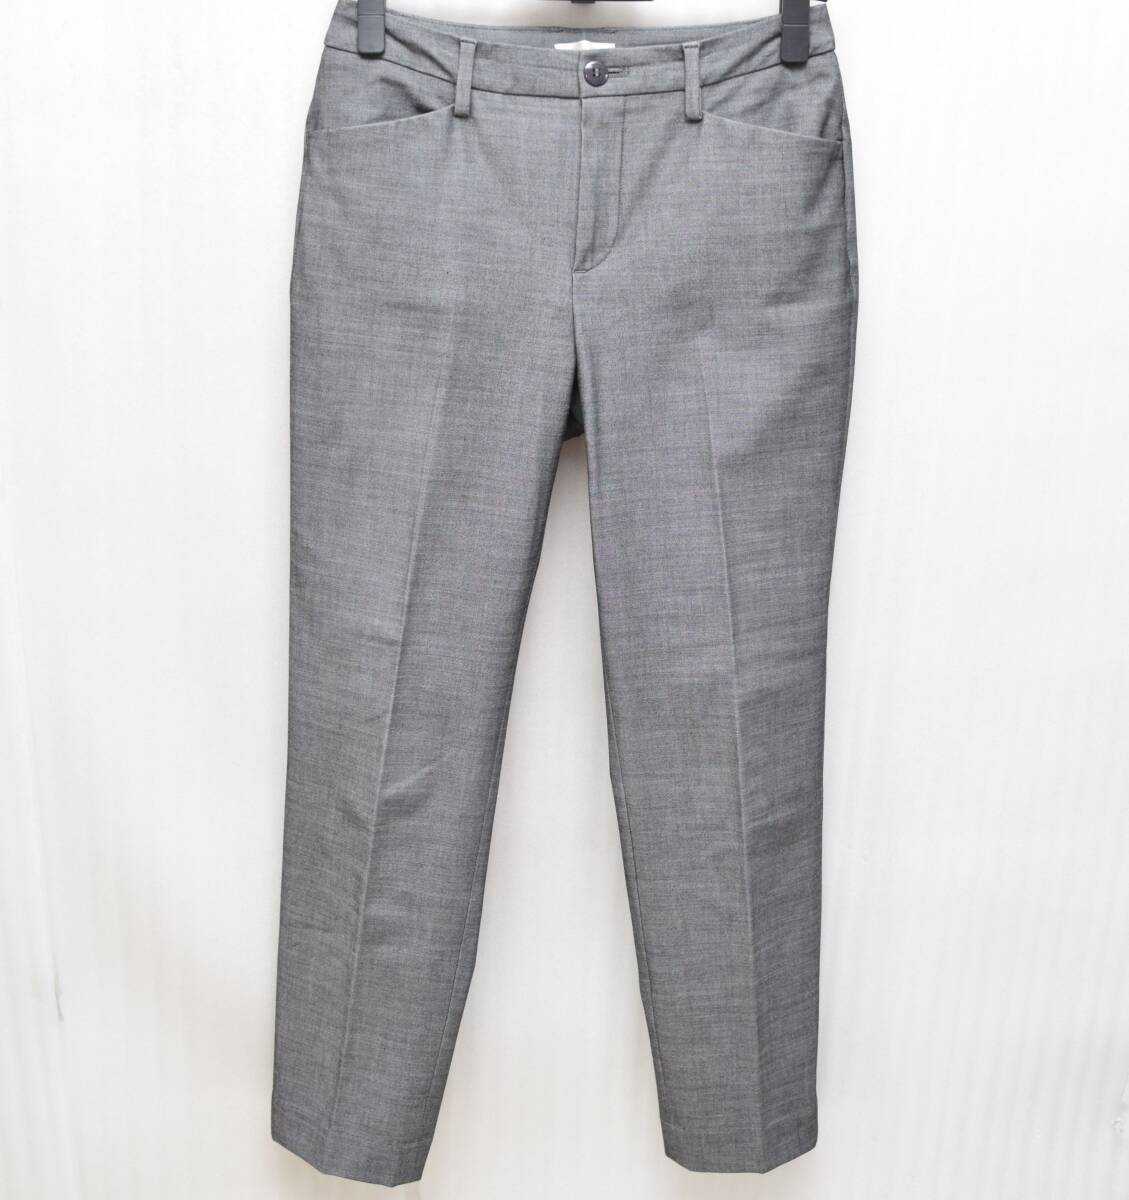 2022 year of model regular price 1.6 ten thousand B-THREE B-3 Be s Lee oxford tapered pants product number 770390